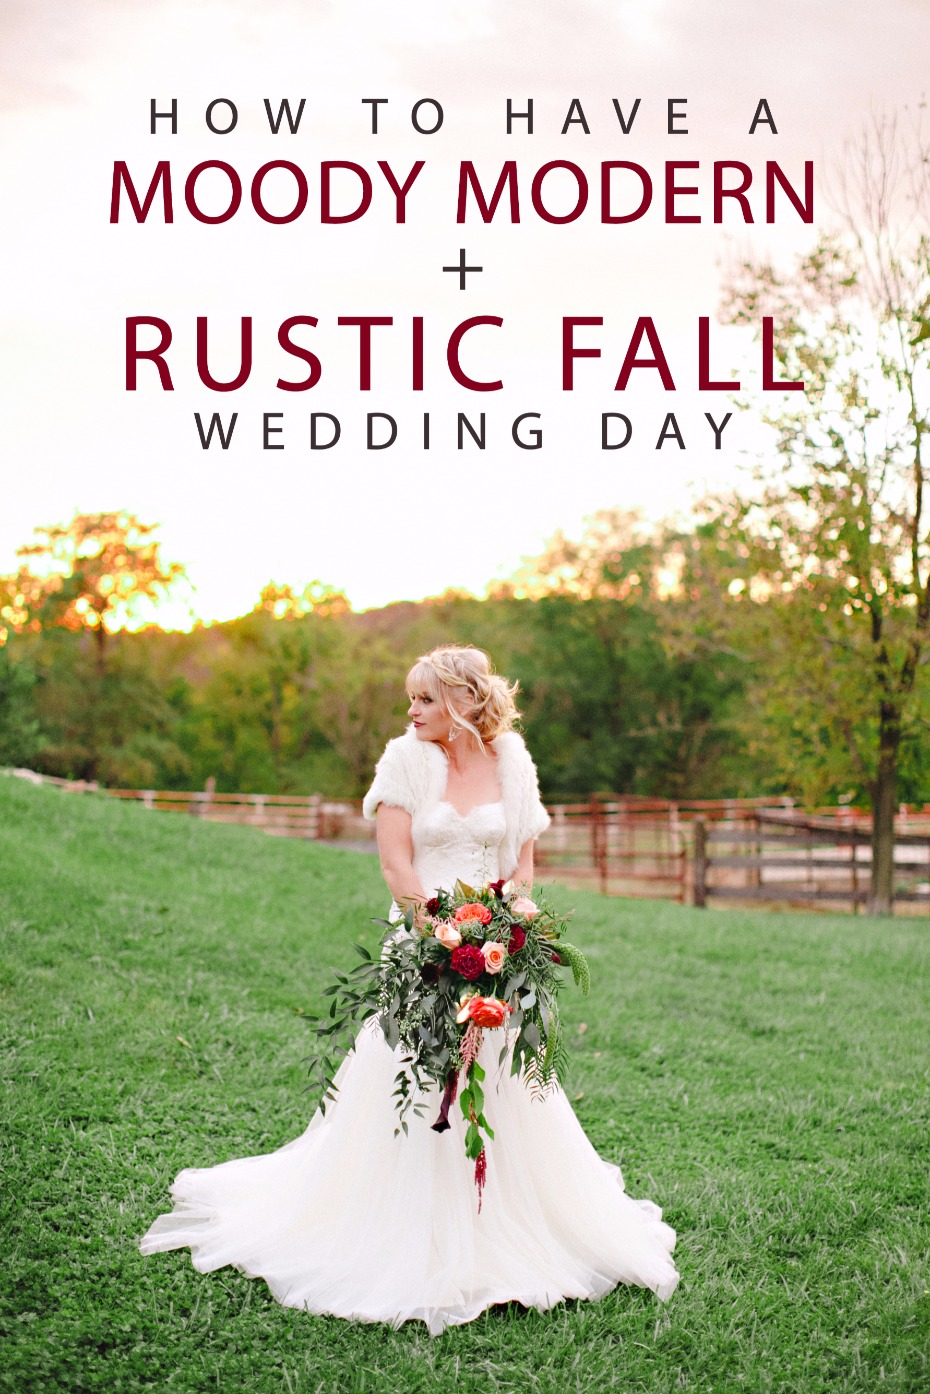 how to have a moody modern rustic fall wedding day